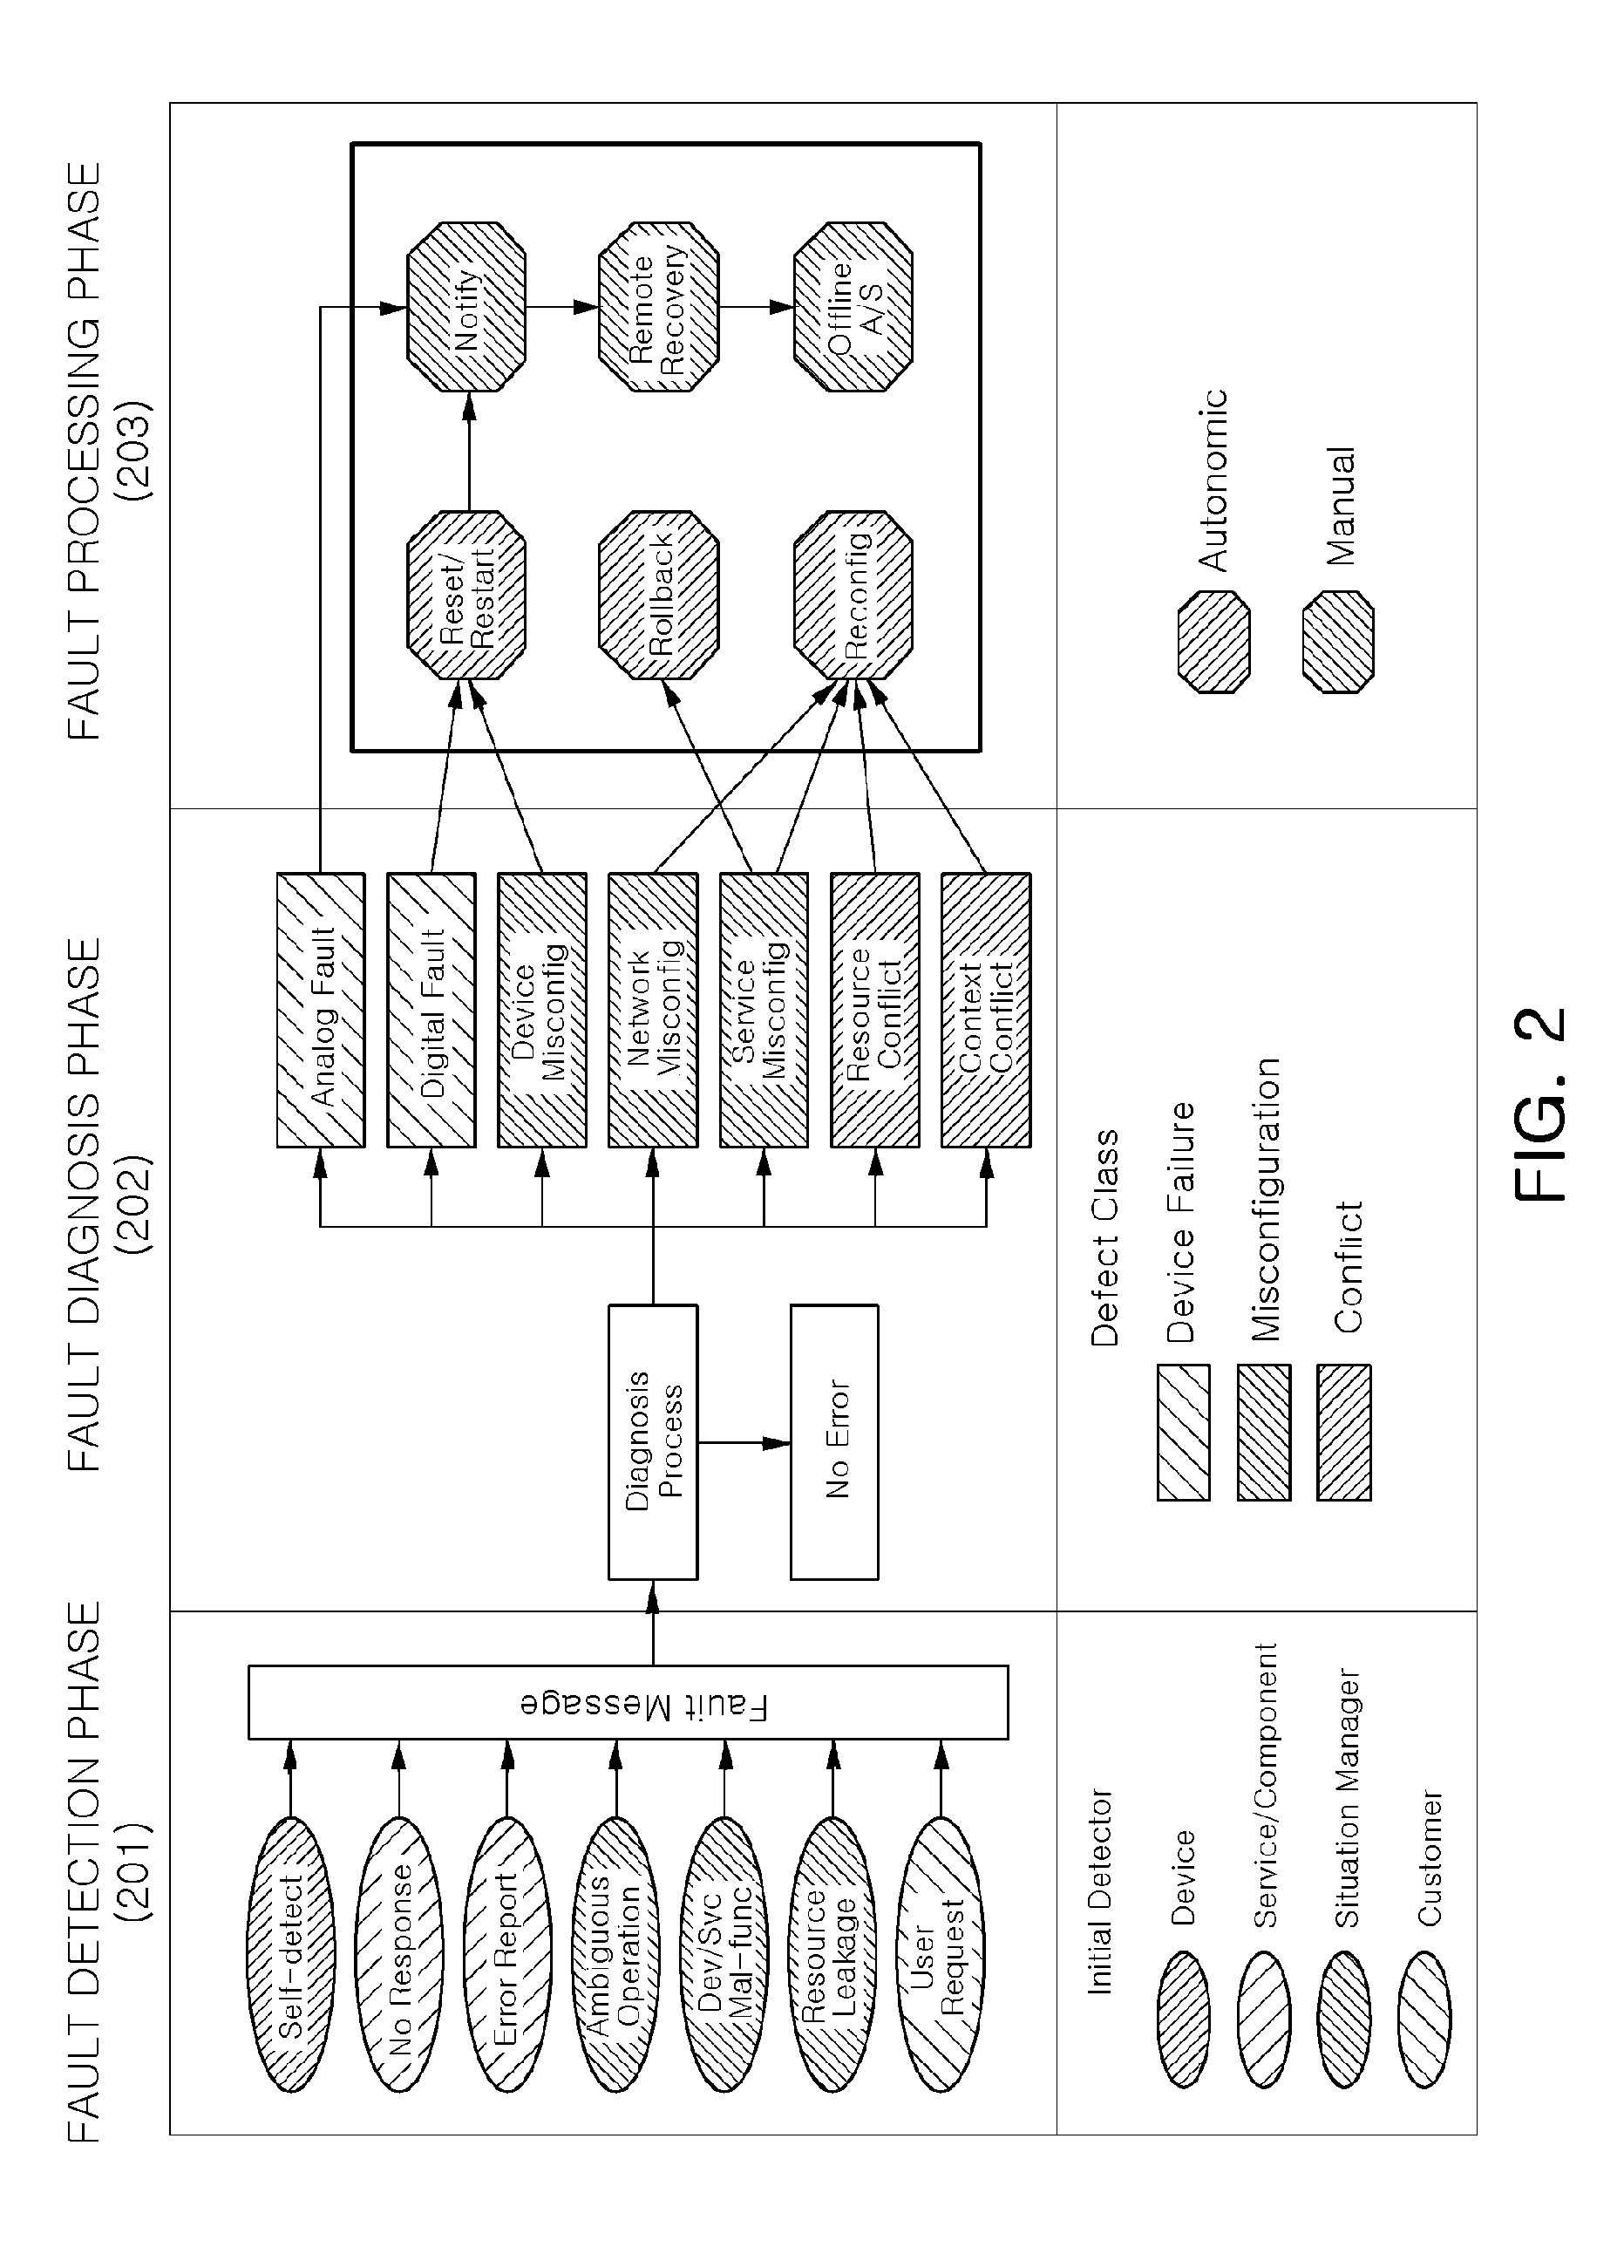 System and method for autonomously processing faults in home network environments